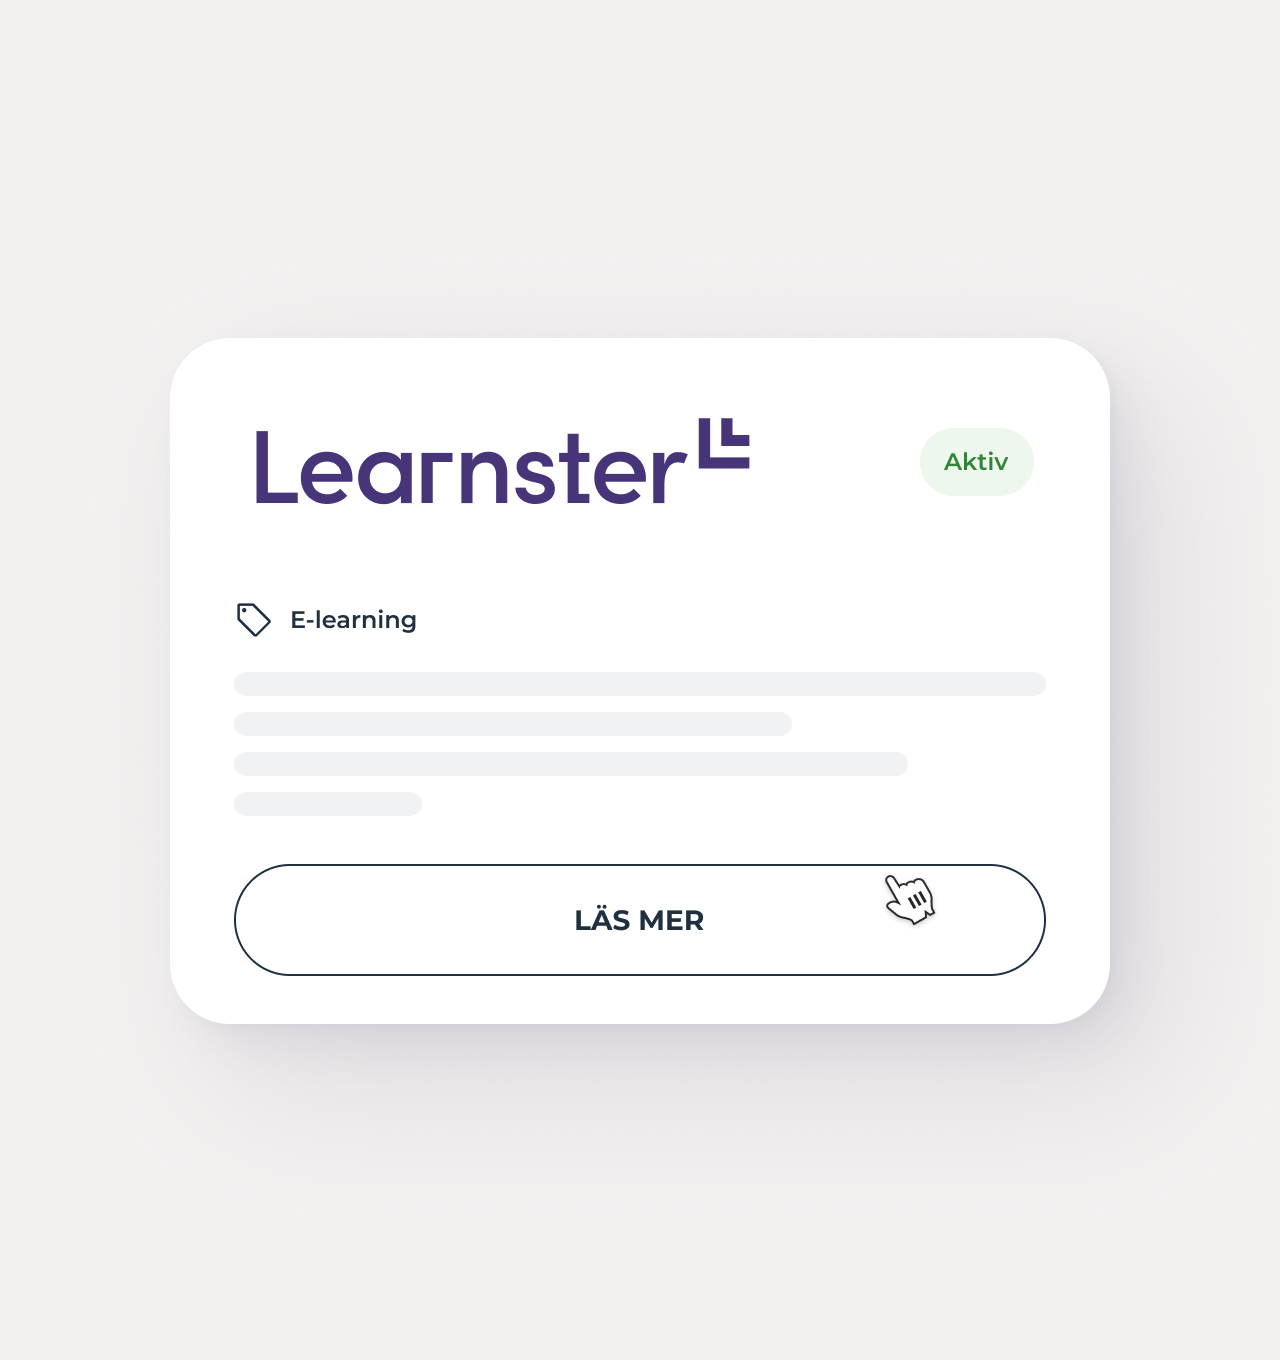 Learnster